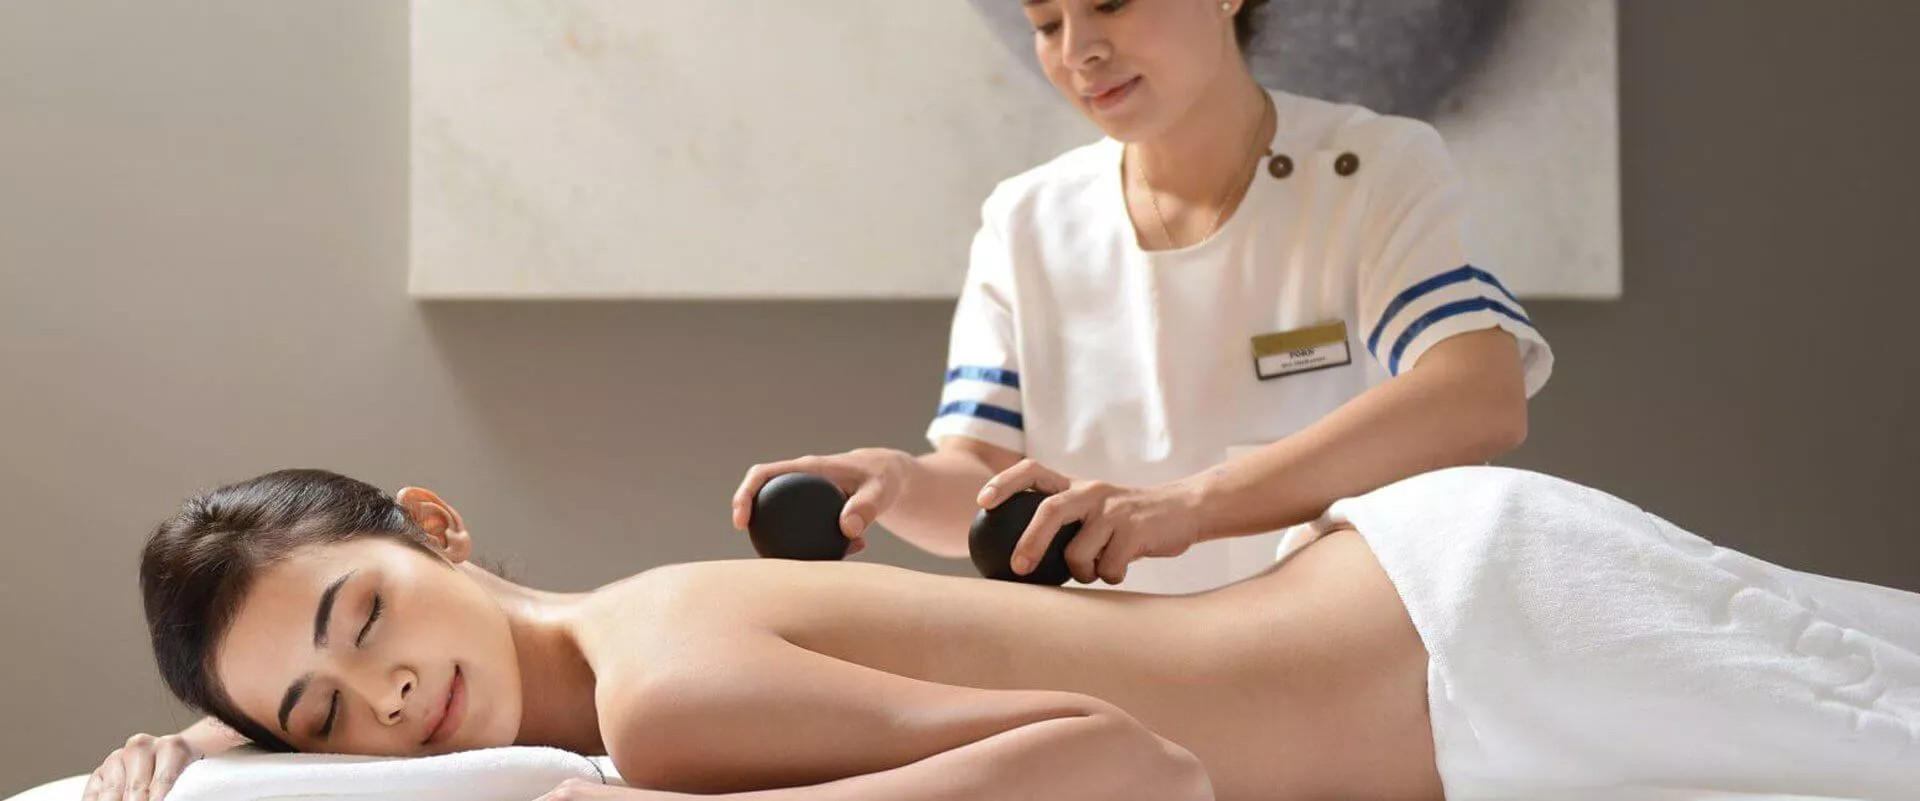 The Thai Massage & Spa in Thailand, Central Asia | SPAs,Massages - Rated 3.7